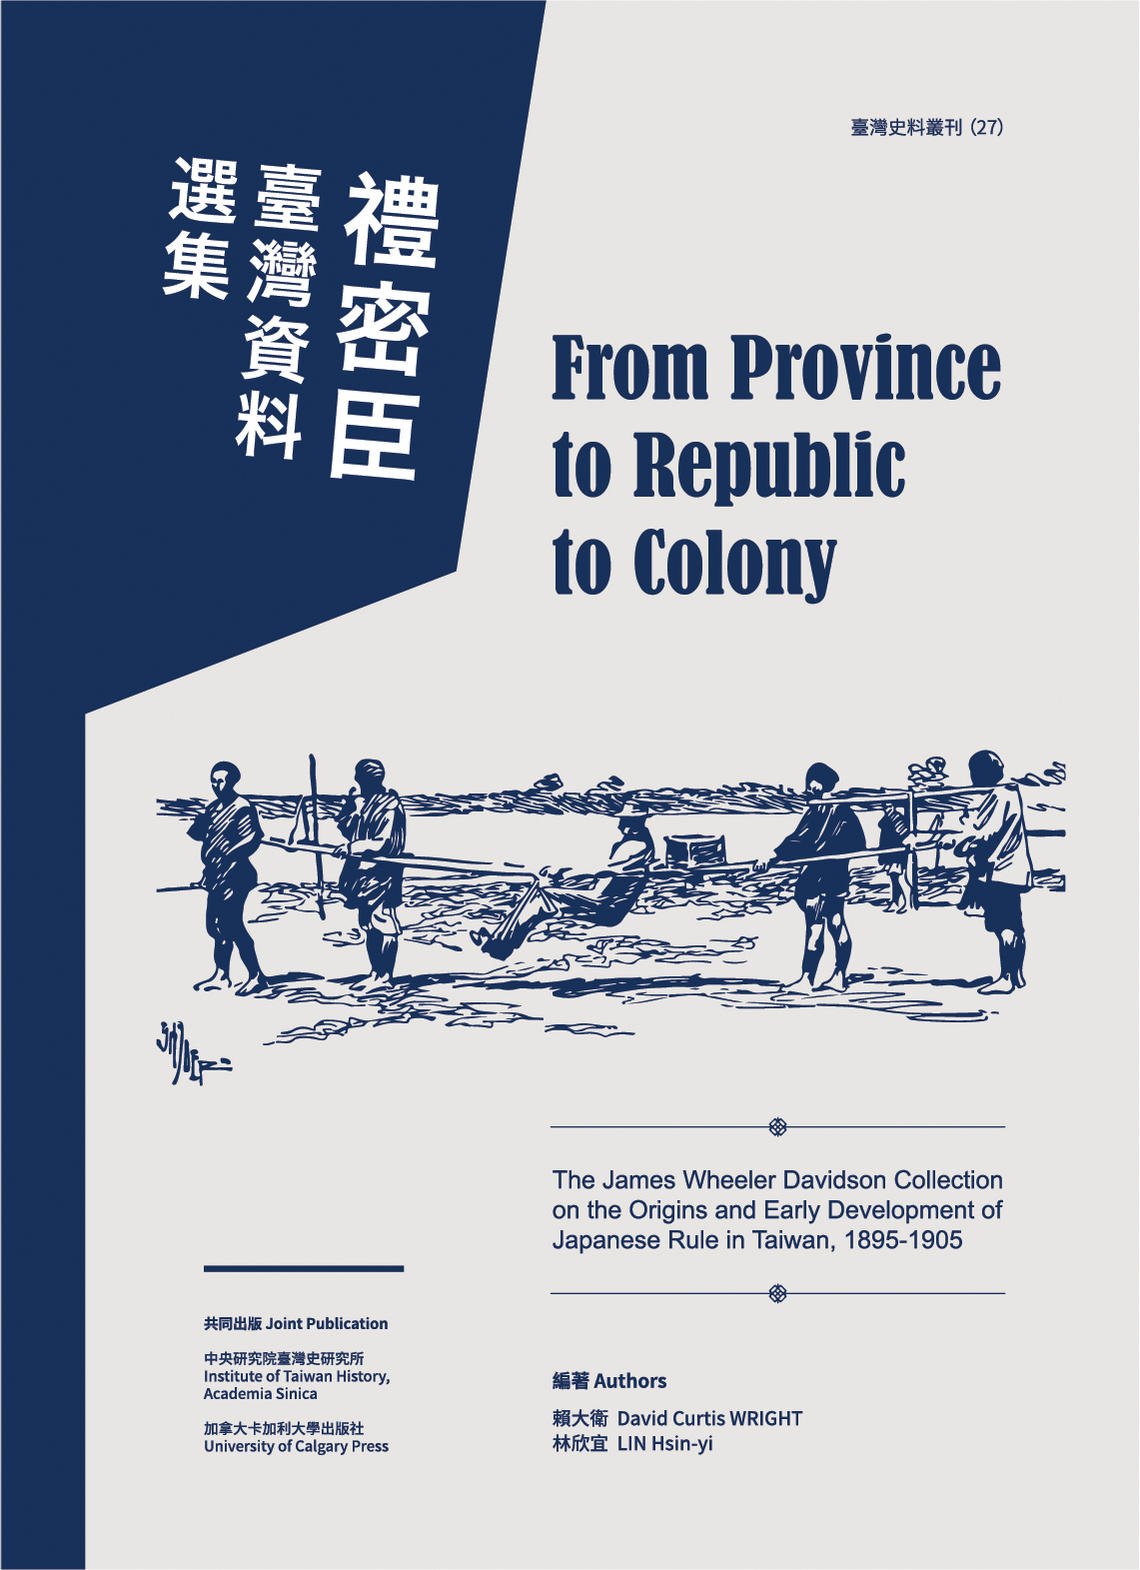 From Province to Republic to Colony: Historical Accounts, Photographs and Artifacts from the James Wheeler Davidson Collection on the Origins of Japanese Rule in Taiwan is a joint publication from the University of Calgary Press and the Institute of Taiwan History, Academia Sinica in Taiwan.